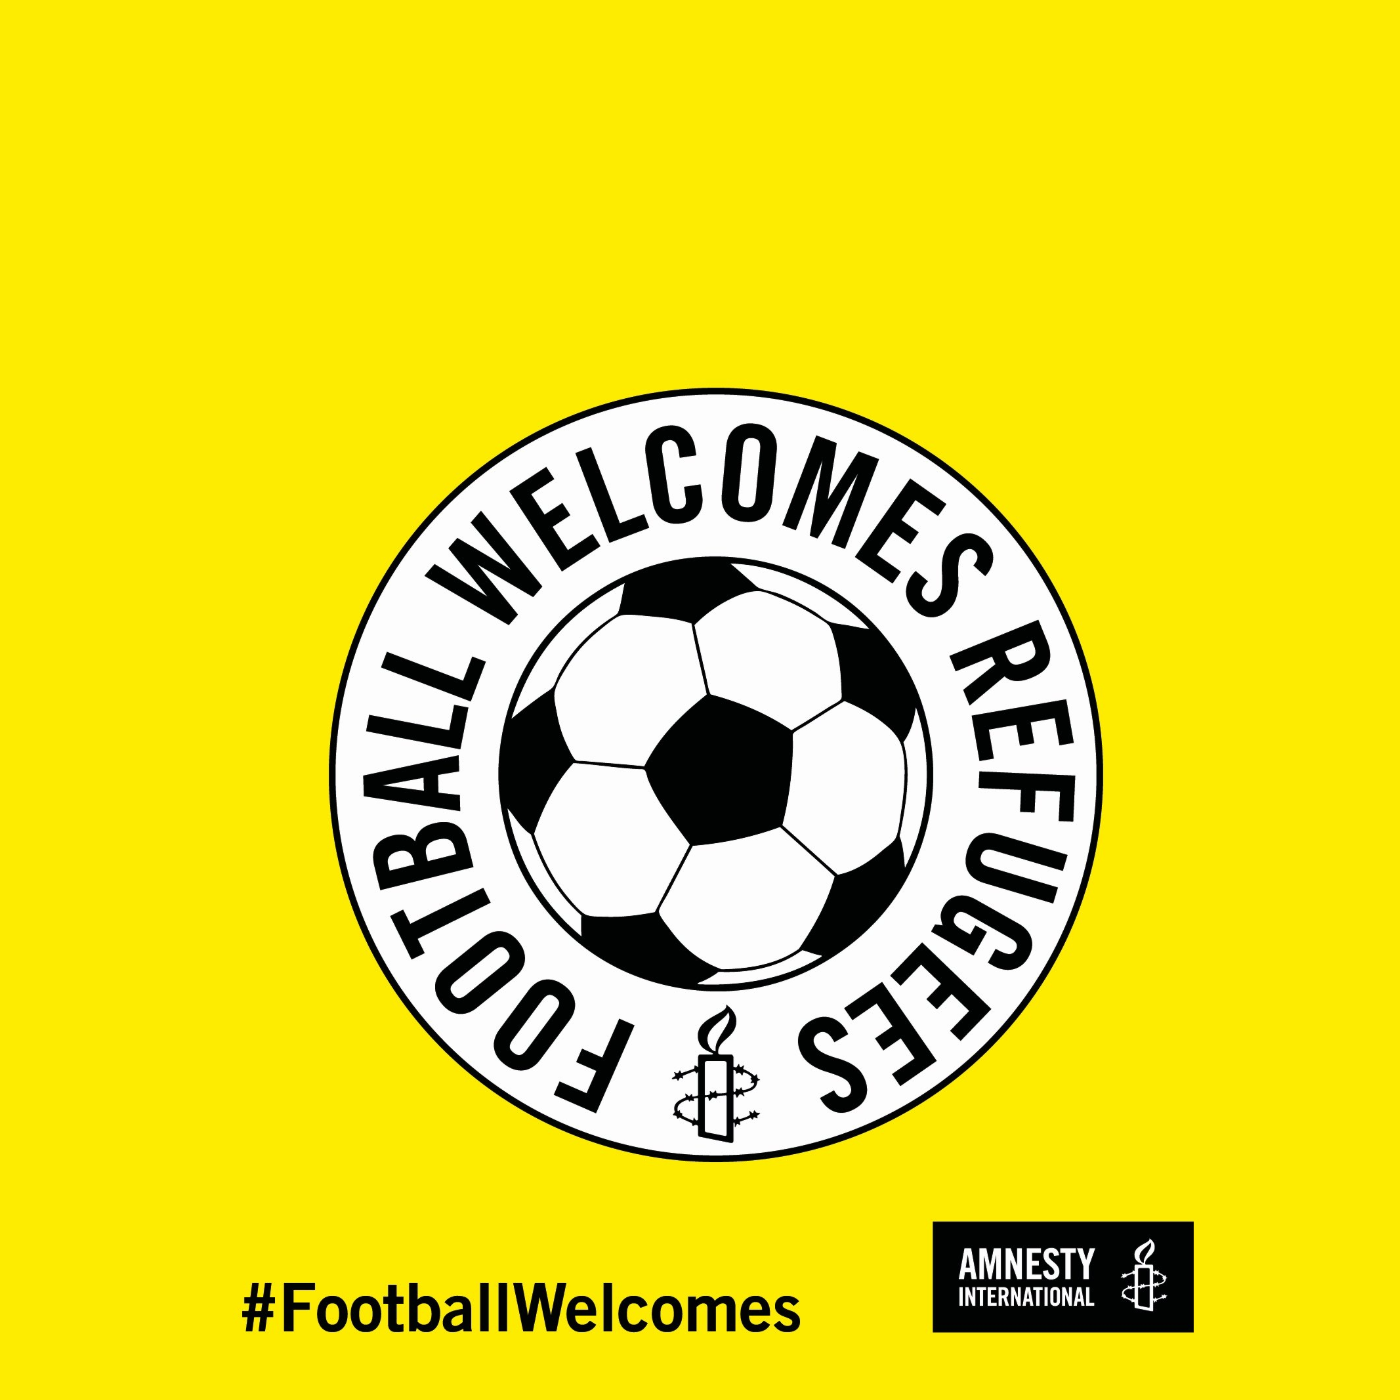 Football Welcomes Refugees